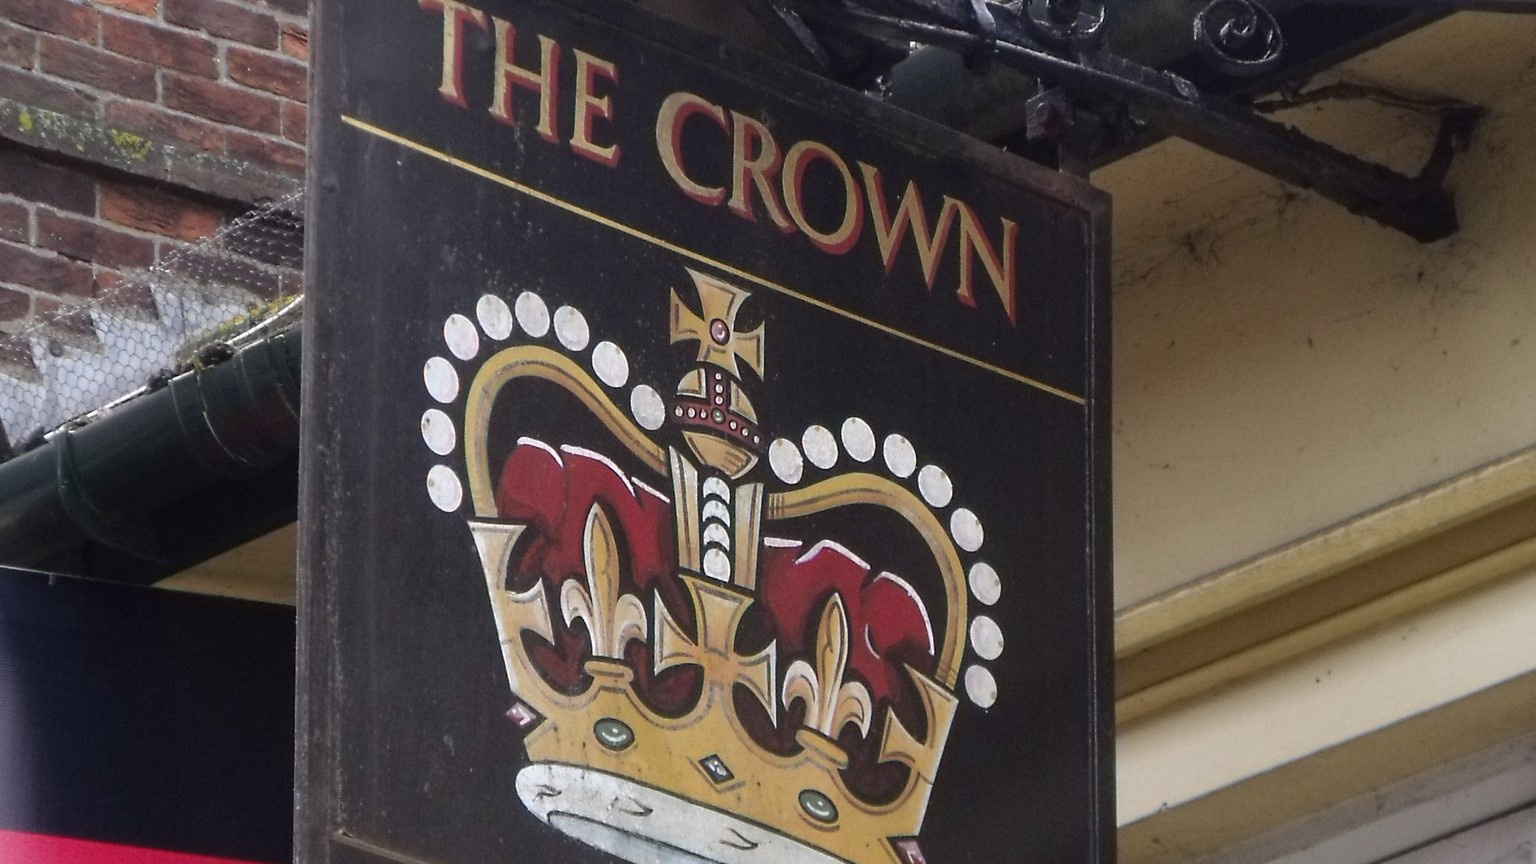 "The Crown - High Street, Shaftesbury - pub sign" by ell brown is licensed under CC BY 2.0. (cropped)